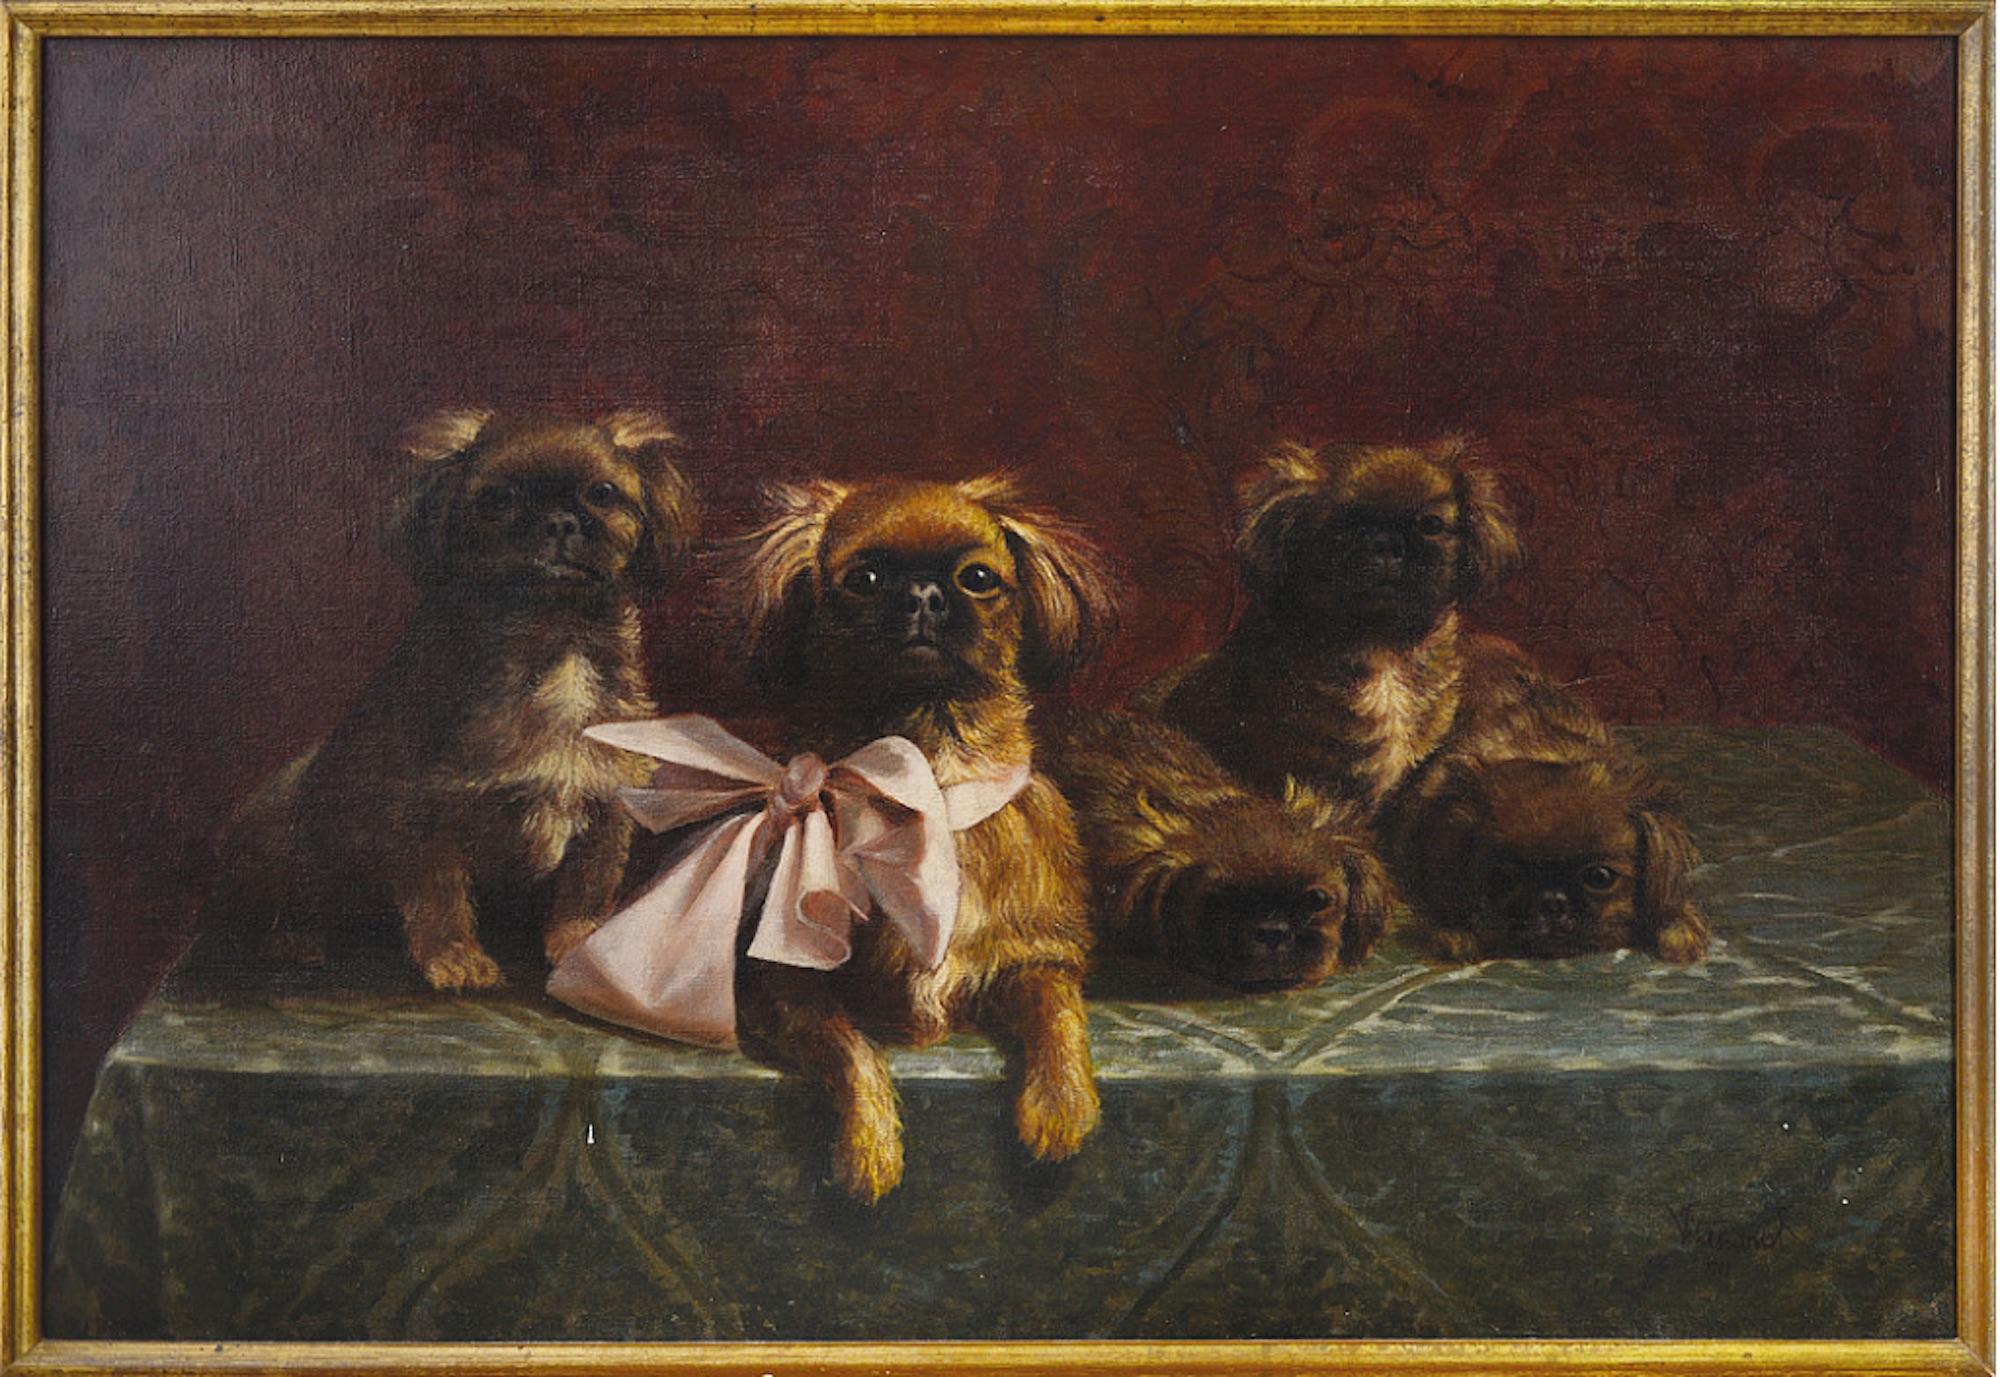 Filiberto Vitaliano Rossi Figurative Painting - Pekingese Family of Dogs - Oil on Canvas by F.V. Rossi - 1939